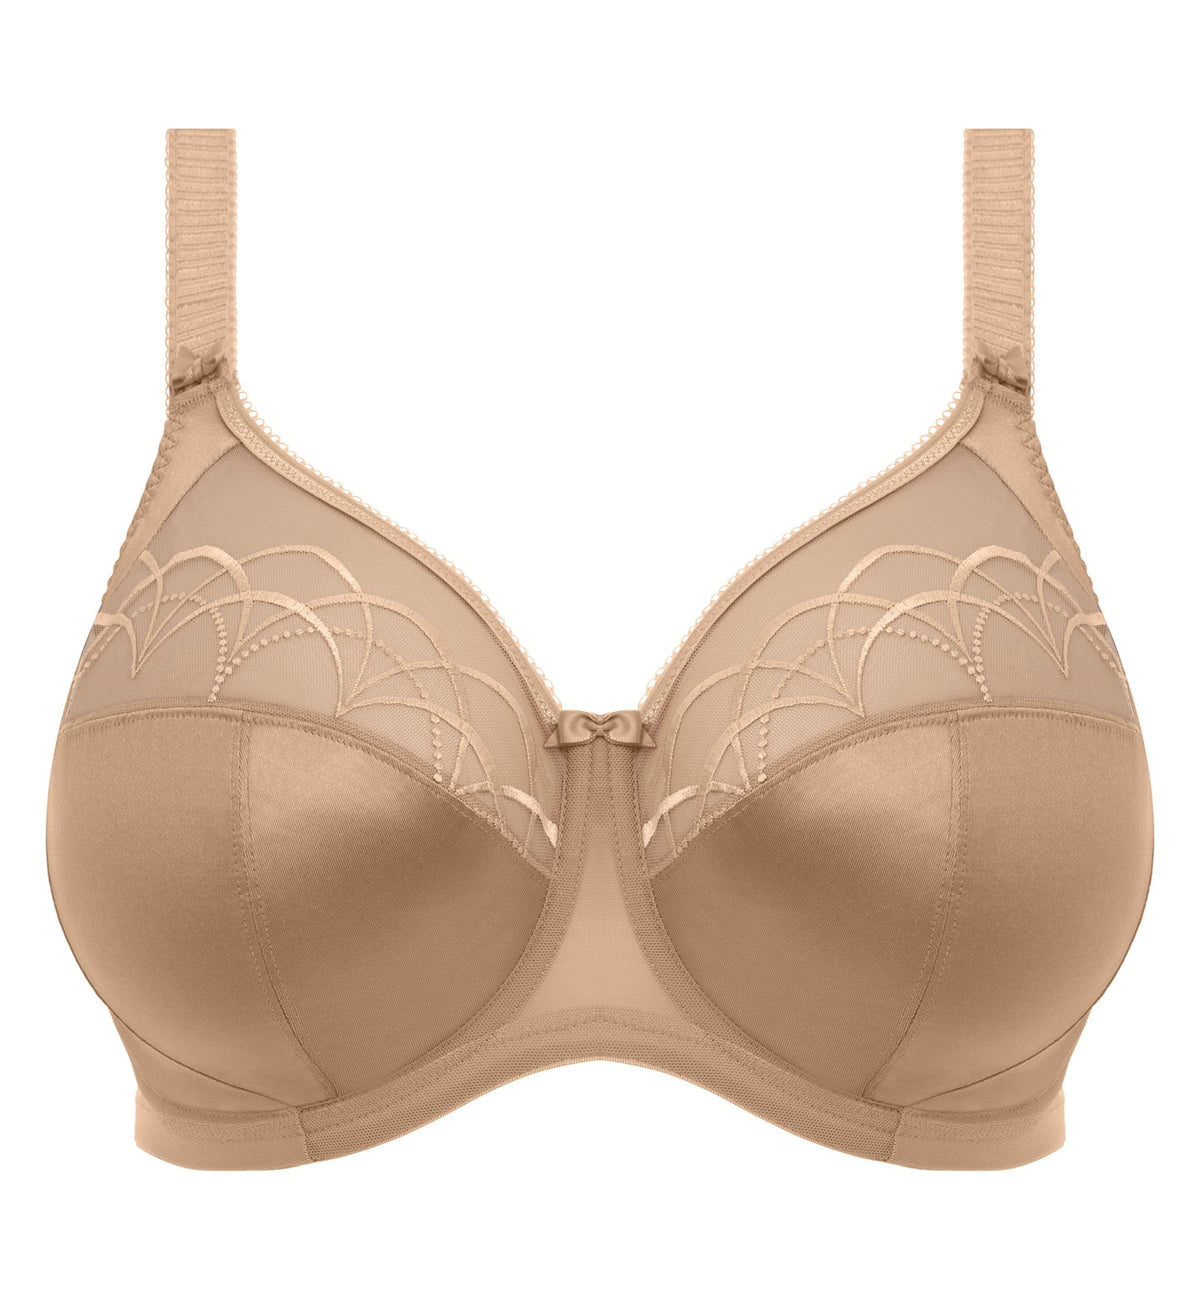 Elomi Cate Embroidered Full Cup Banded Underwire Bra (4030),34H,Hazel - Hazel,34H